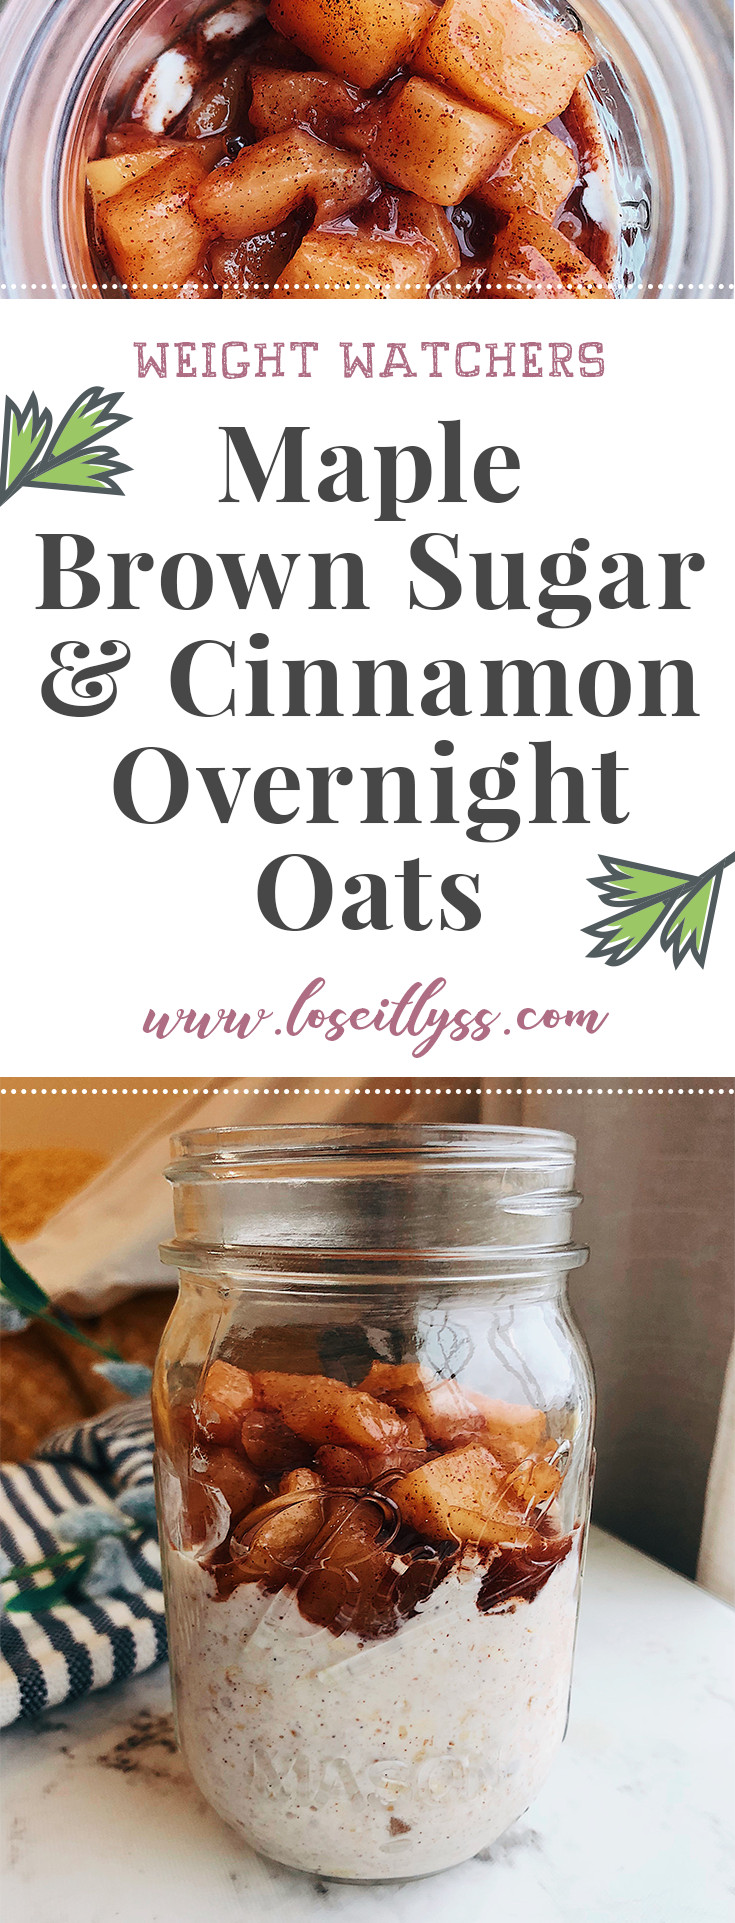 Weight Watchers Overnight Oats
 Weight Watchers Overnight Oats w Maple Syrup & Brown